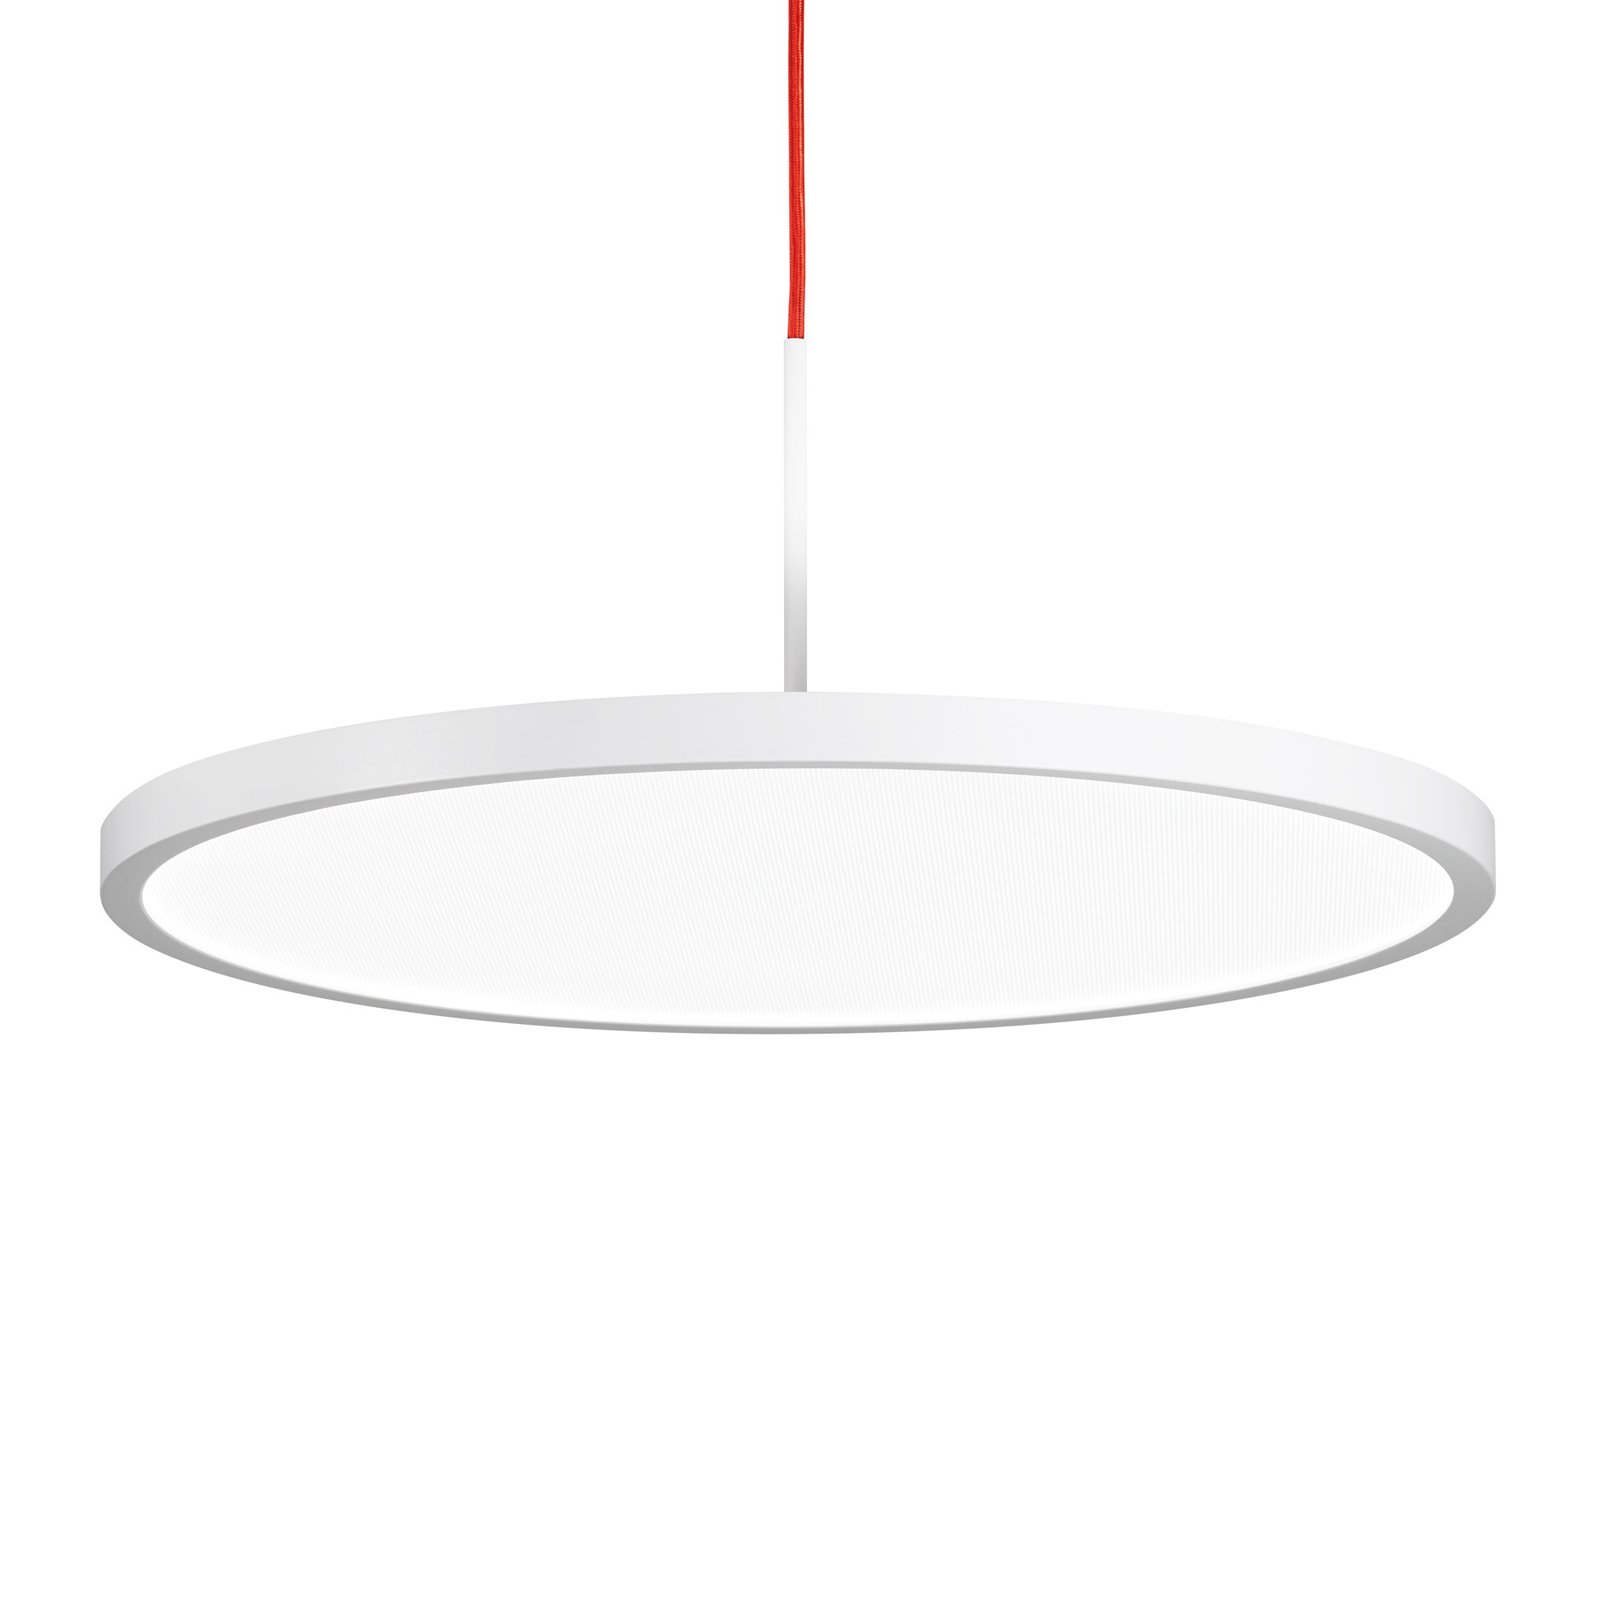 VIVAA 2.0 VTL LED hanging lamp 60cm red cable CCT